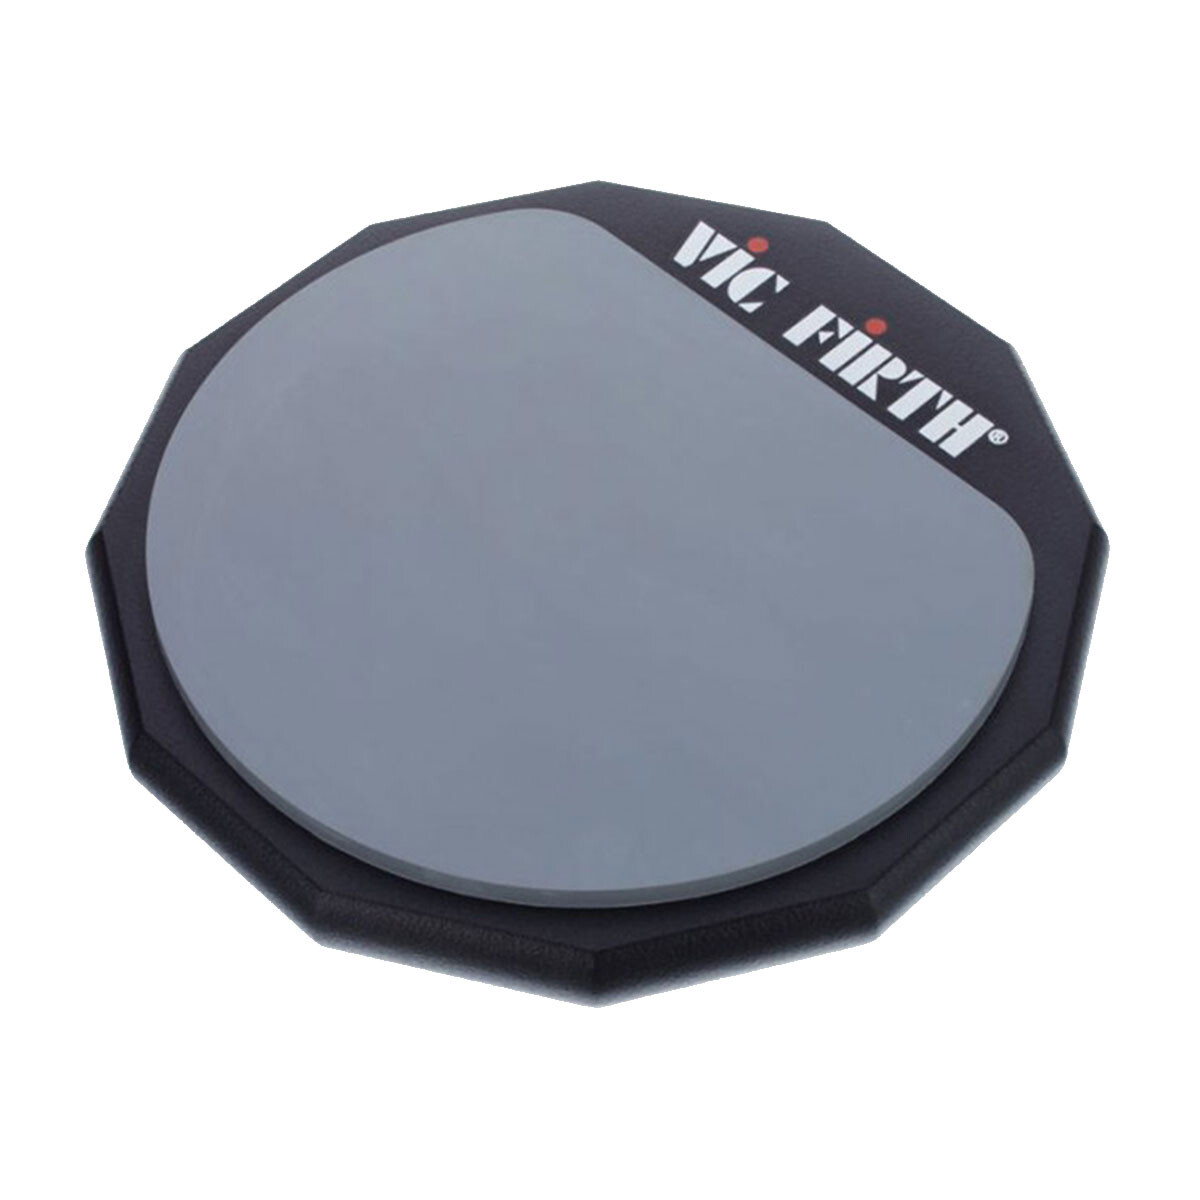 PRACTICABLE/VIC FIRTH PAD12 SOFT 